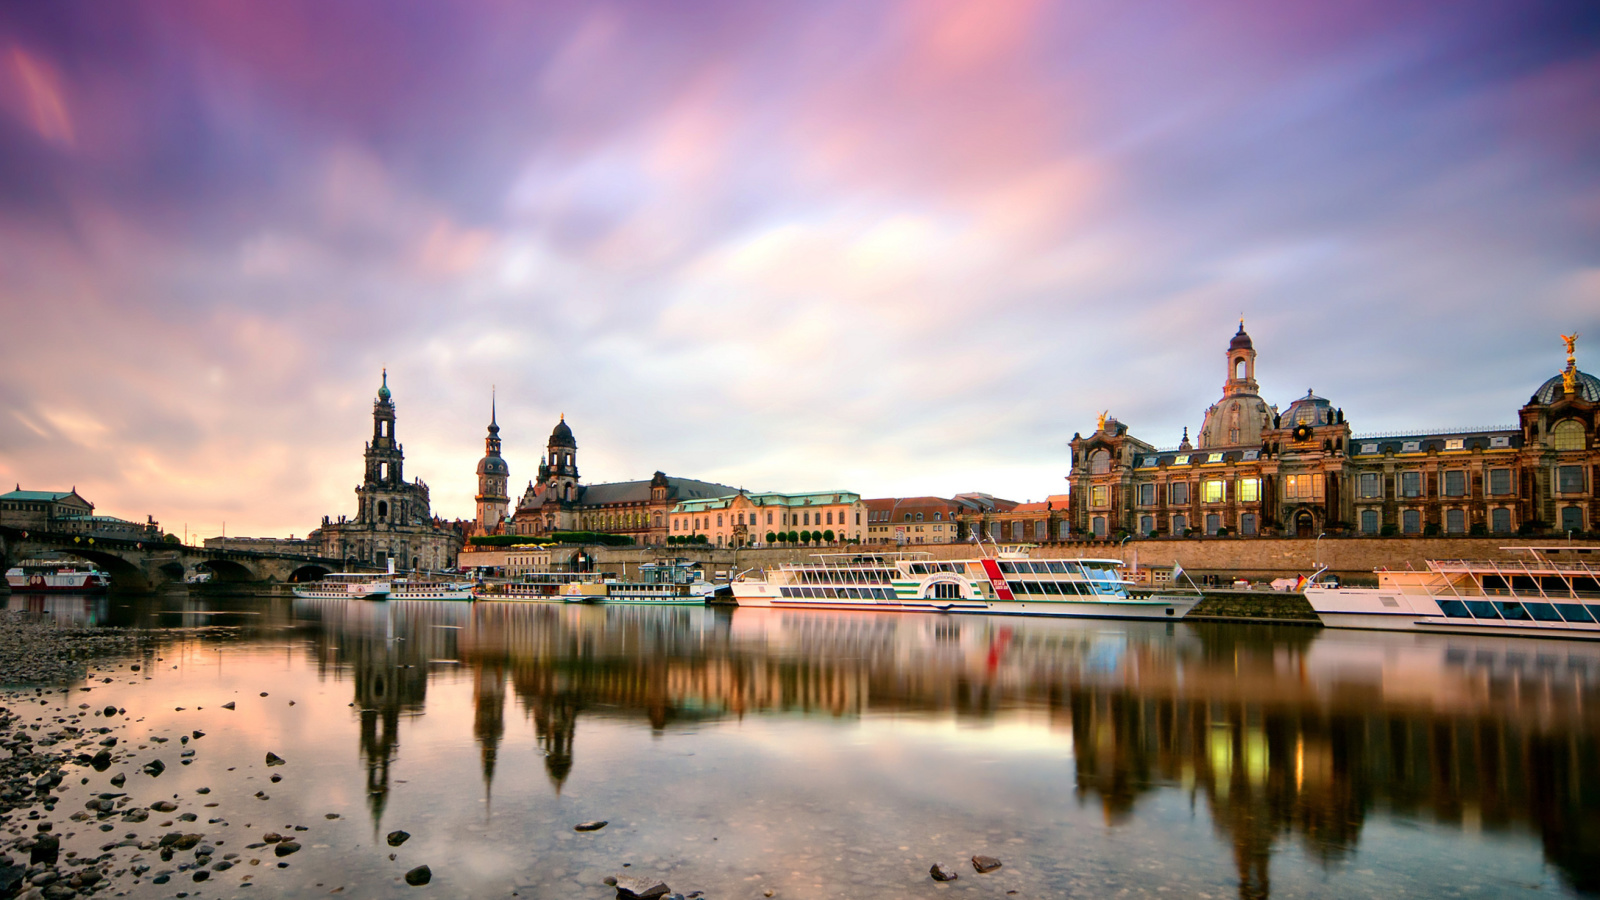 Обои Dresden on Elbe River near Zwinger Palace 1600x900